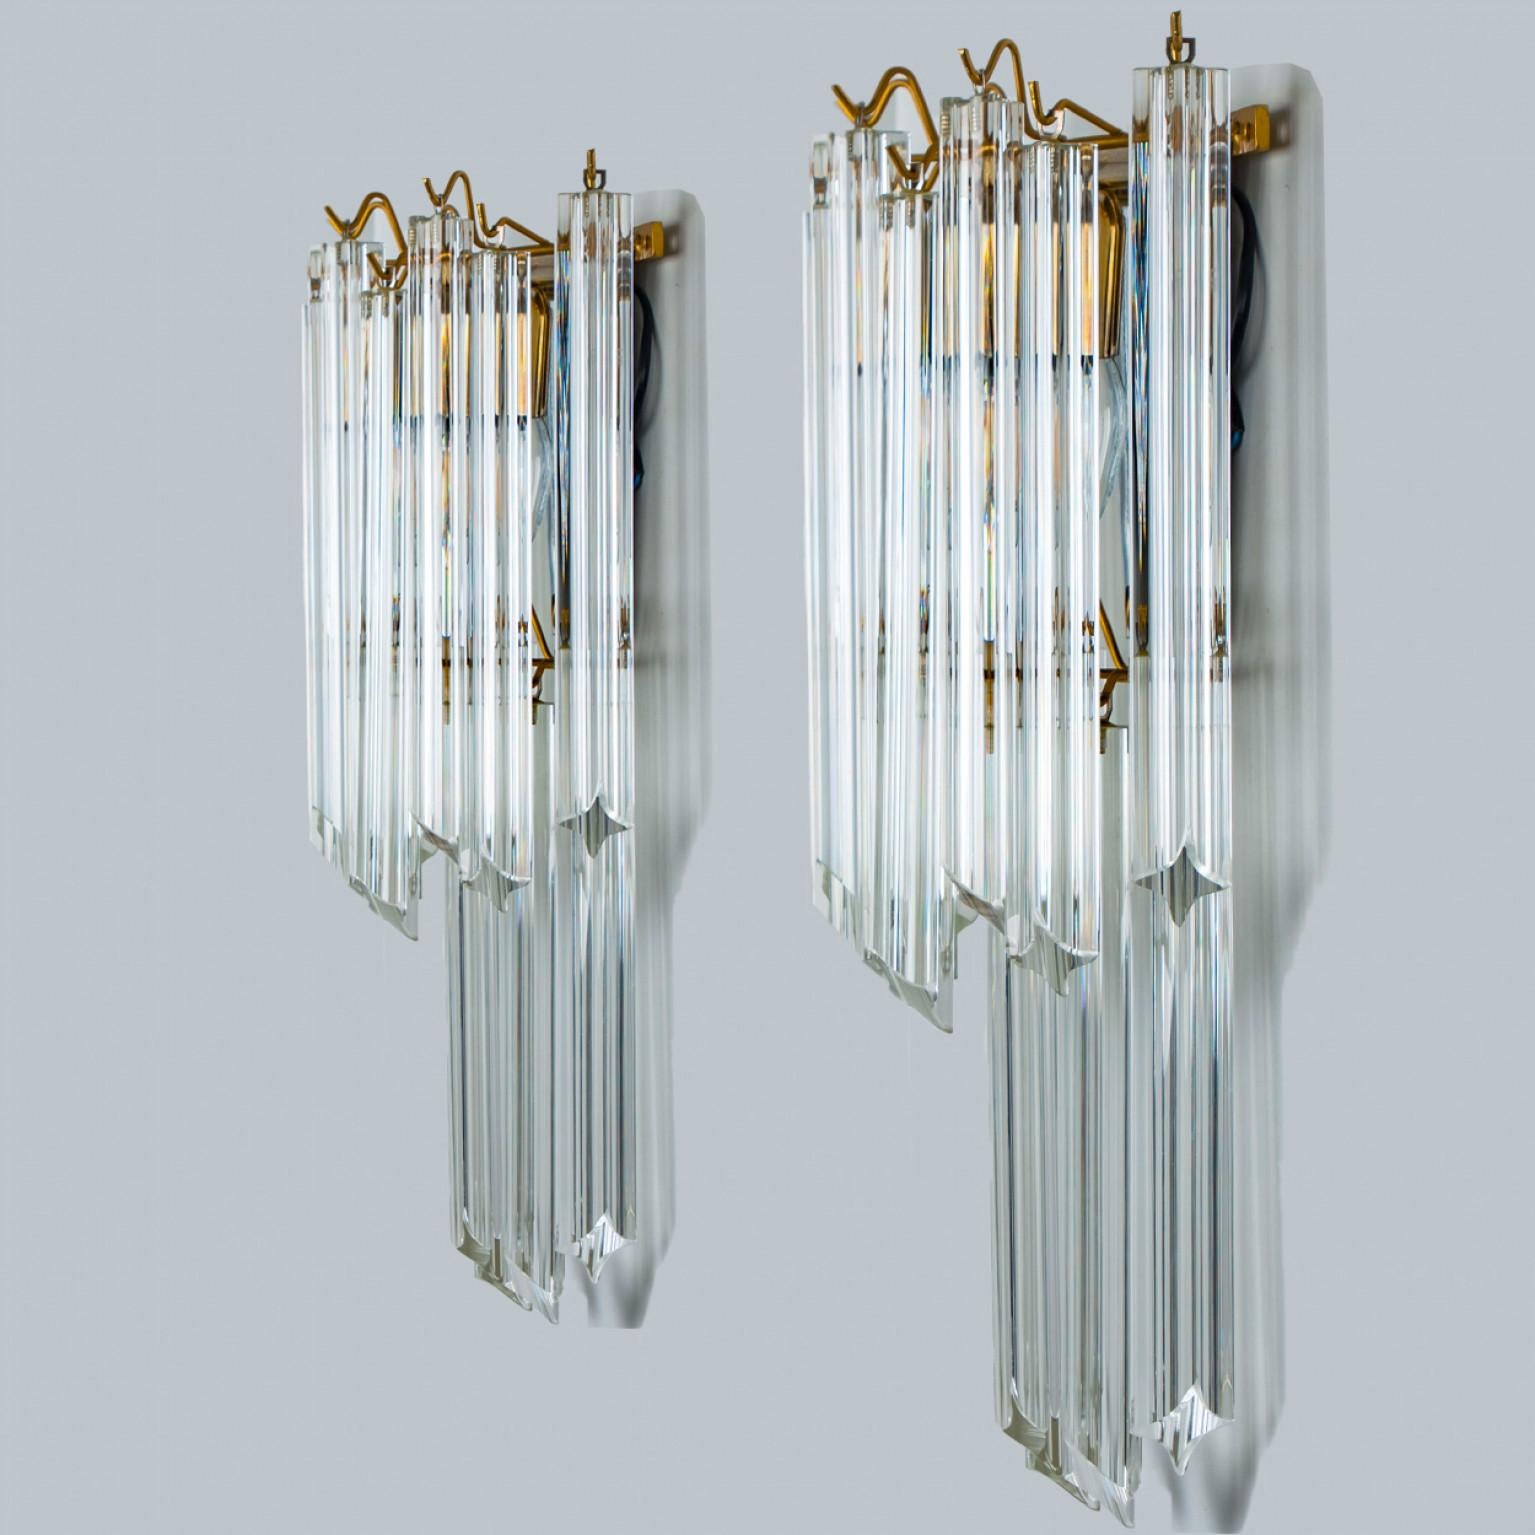 Pair of eautiful triangle shaped glass wall sconces featuring multiple long crystal clear glass tube-like rods, with brass details and back plate. Illuminates beautifully. High-end pieces.

Cleaned and well-wired, in full working order and ready to